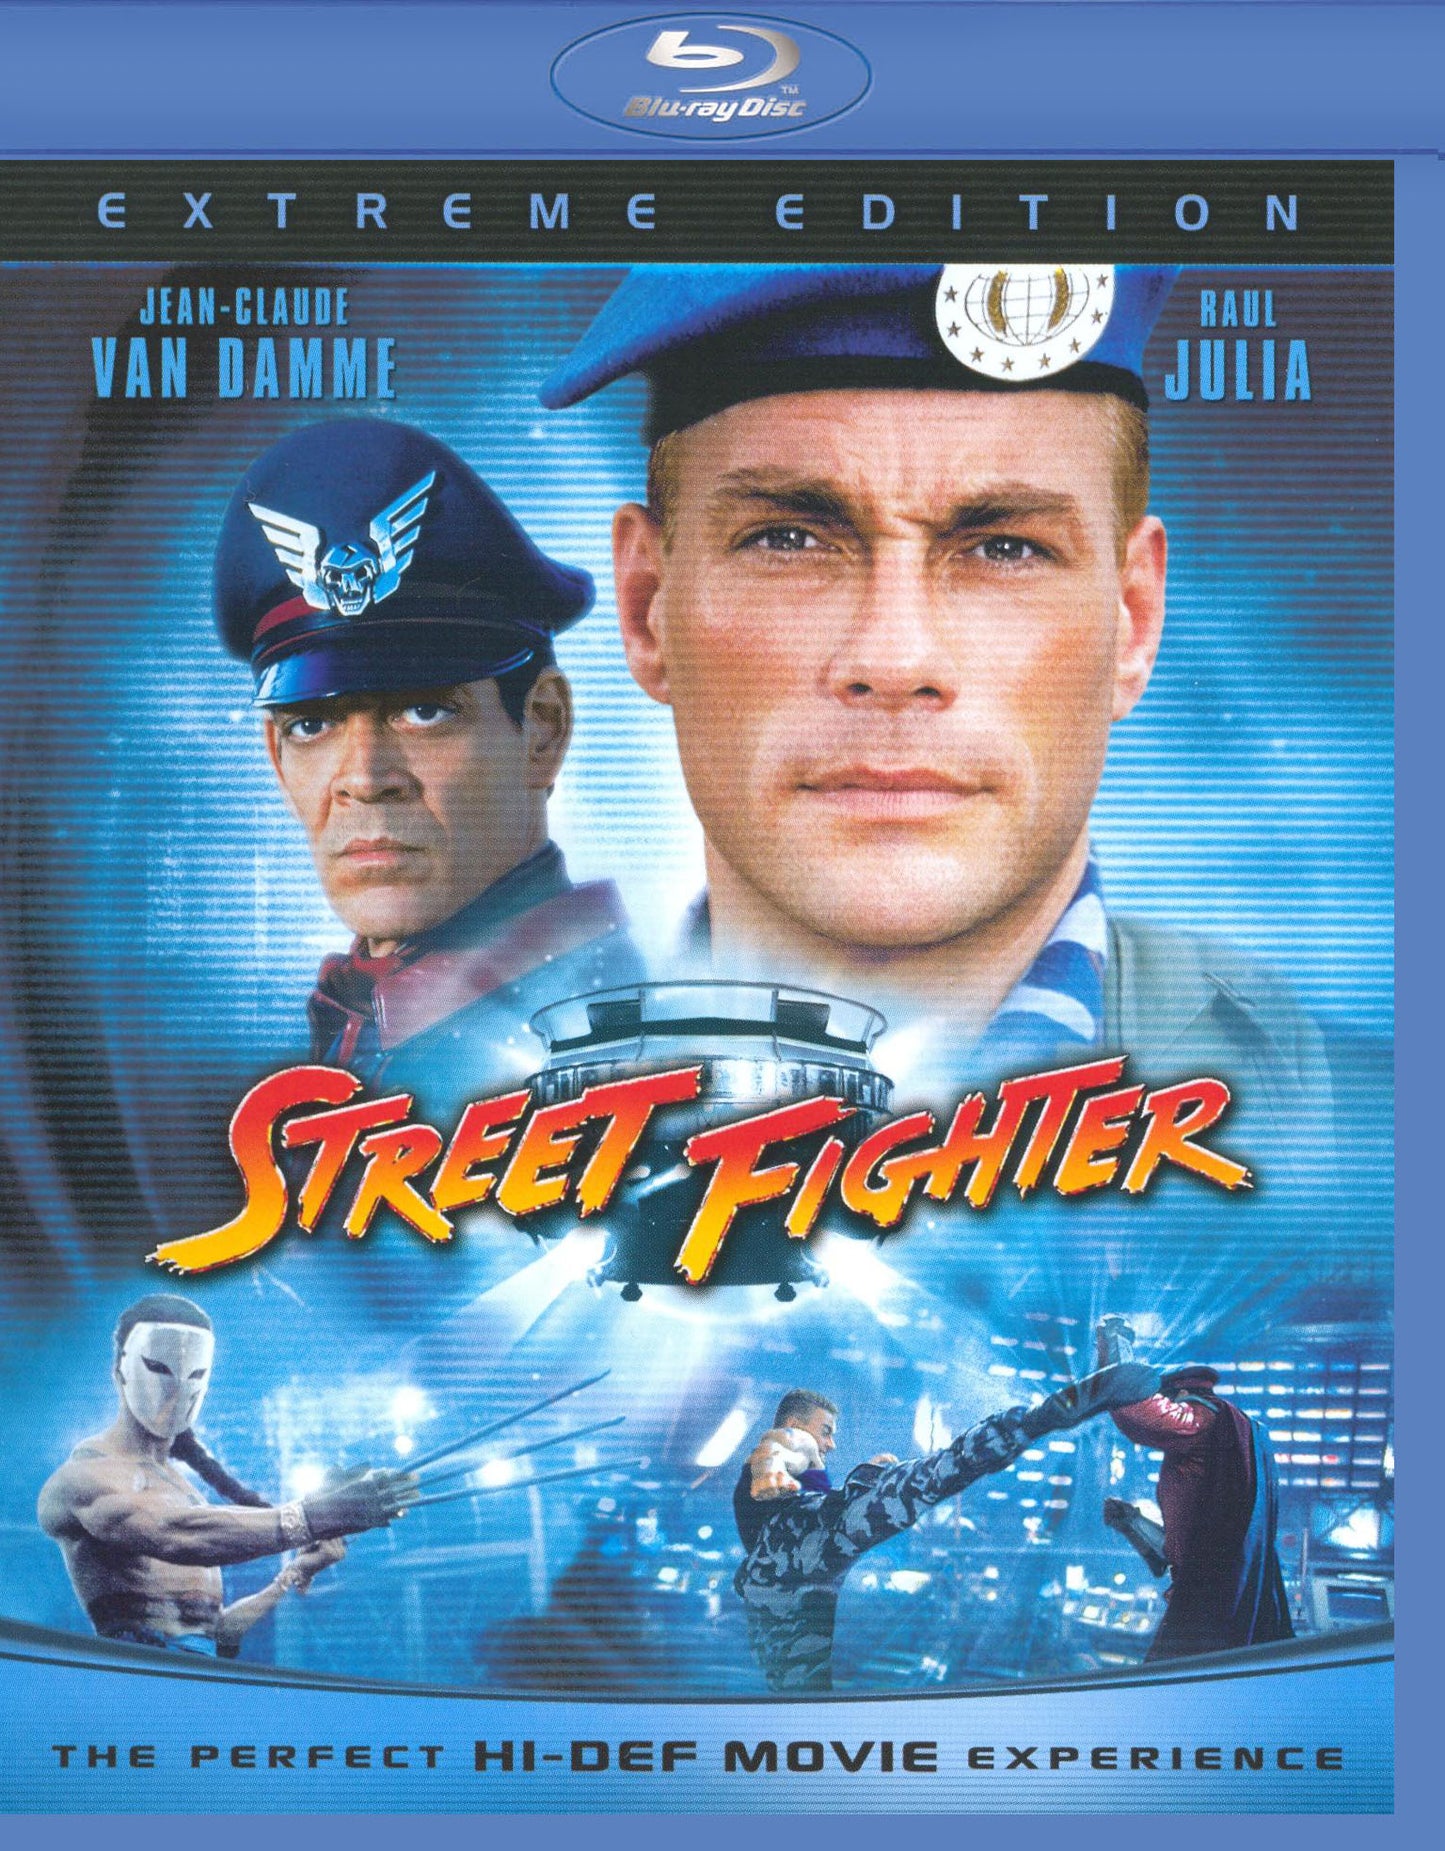 Street Fighter [Extreme Edition] [Blu-ray] cover art